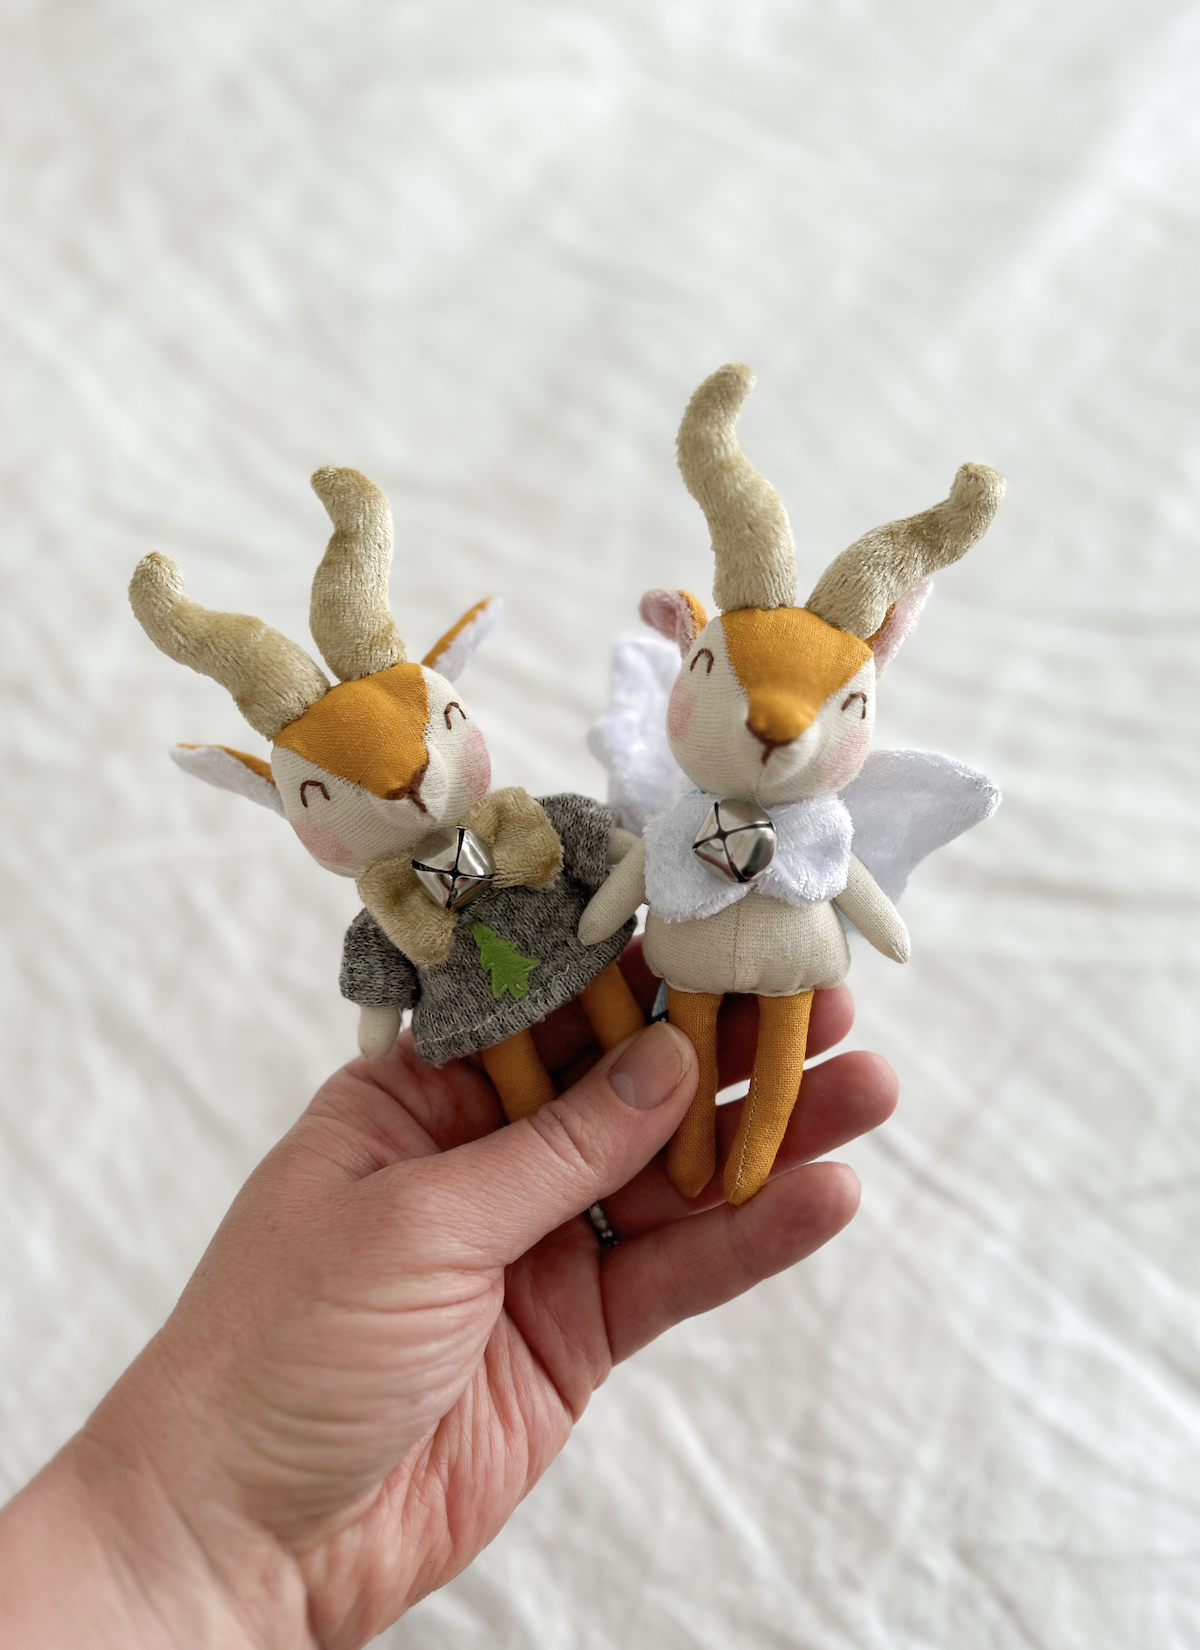 The Limited Edition Tiny Springbok by Smitten Critters